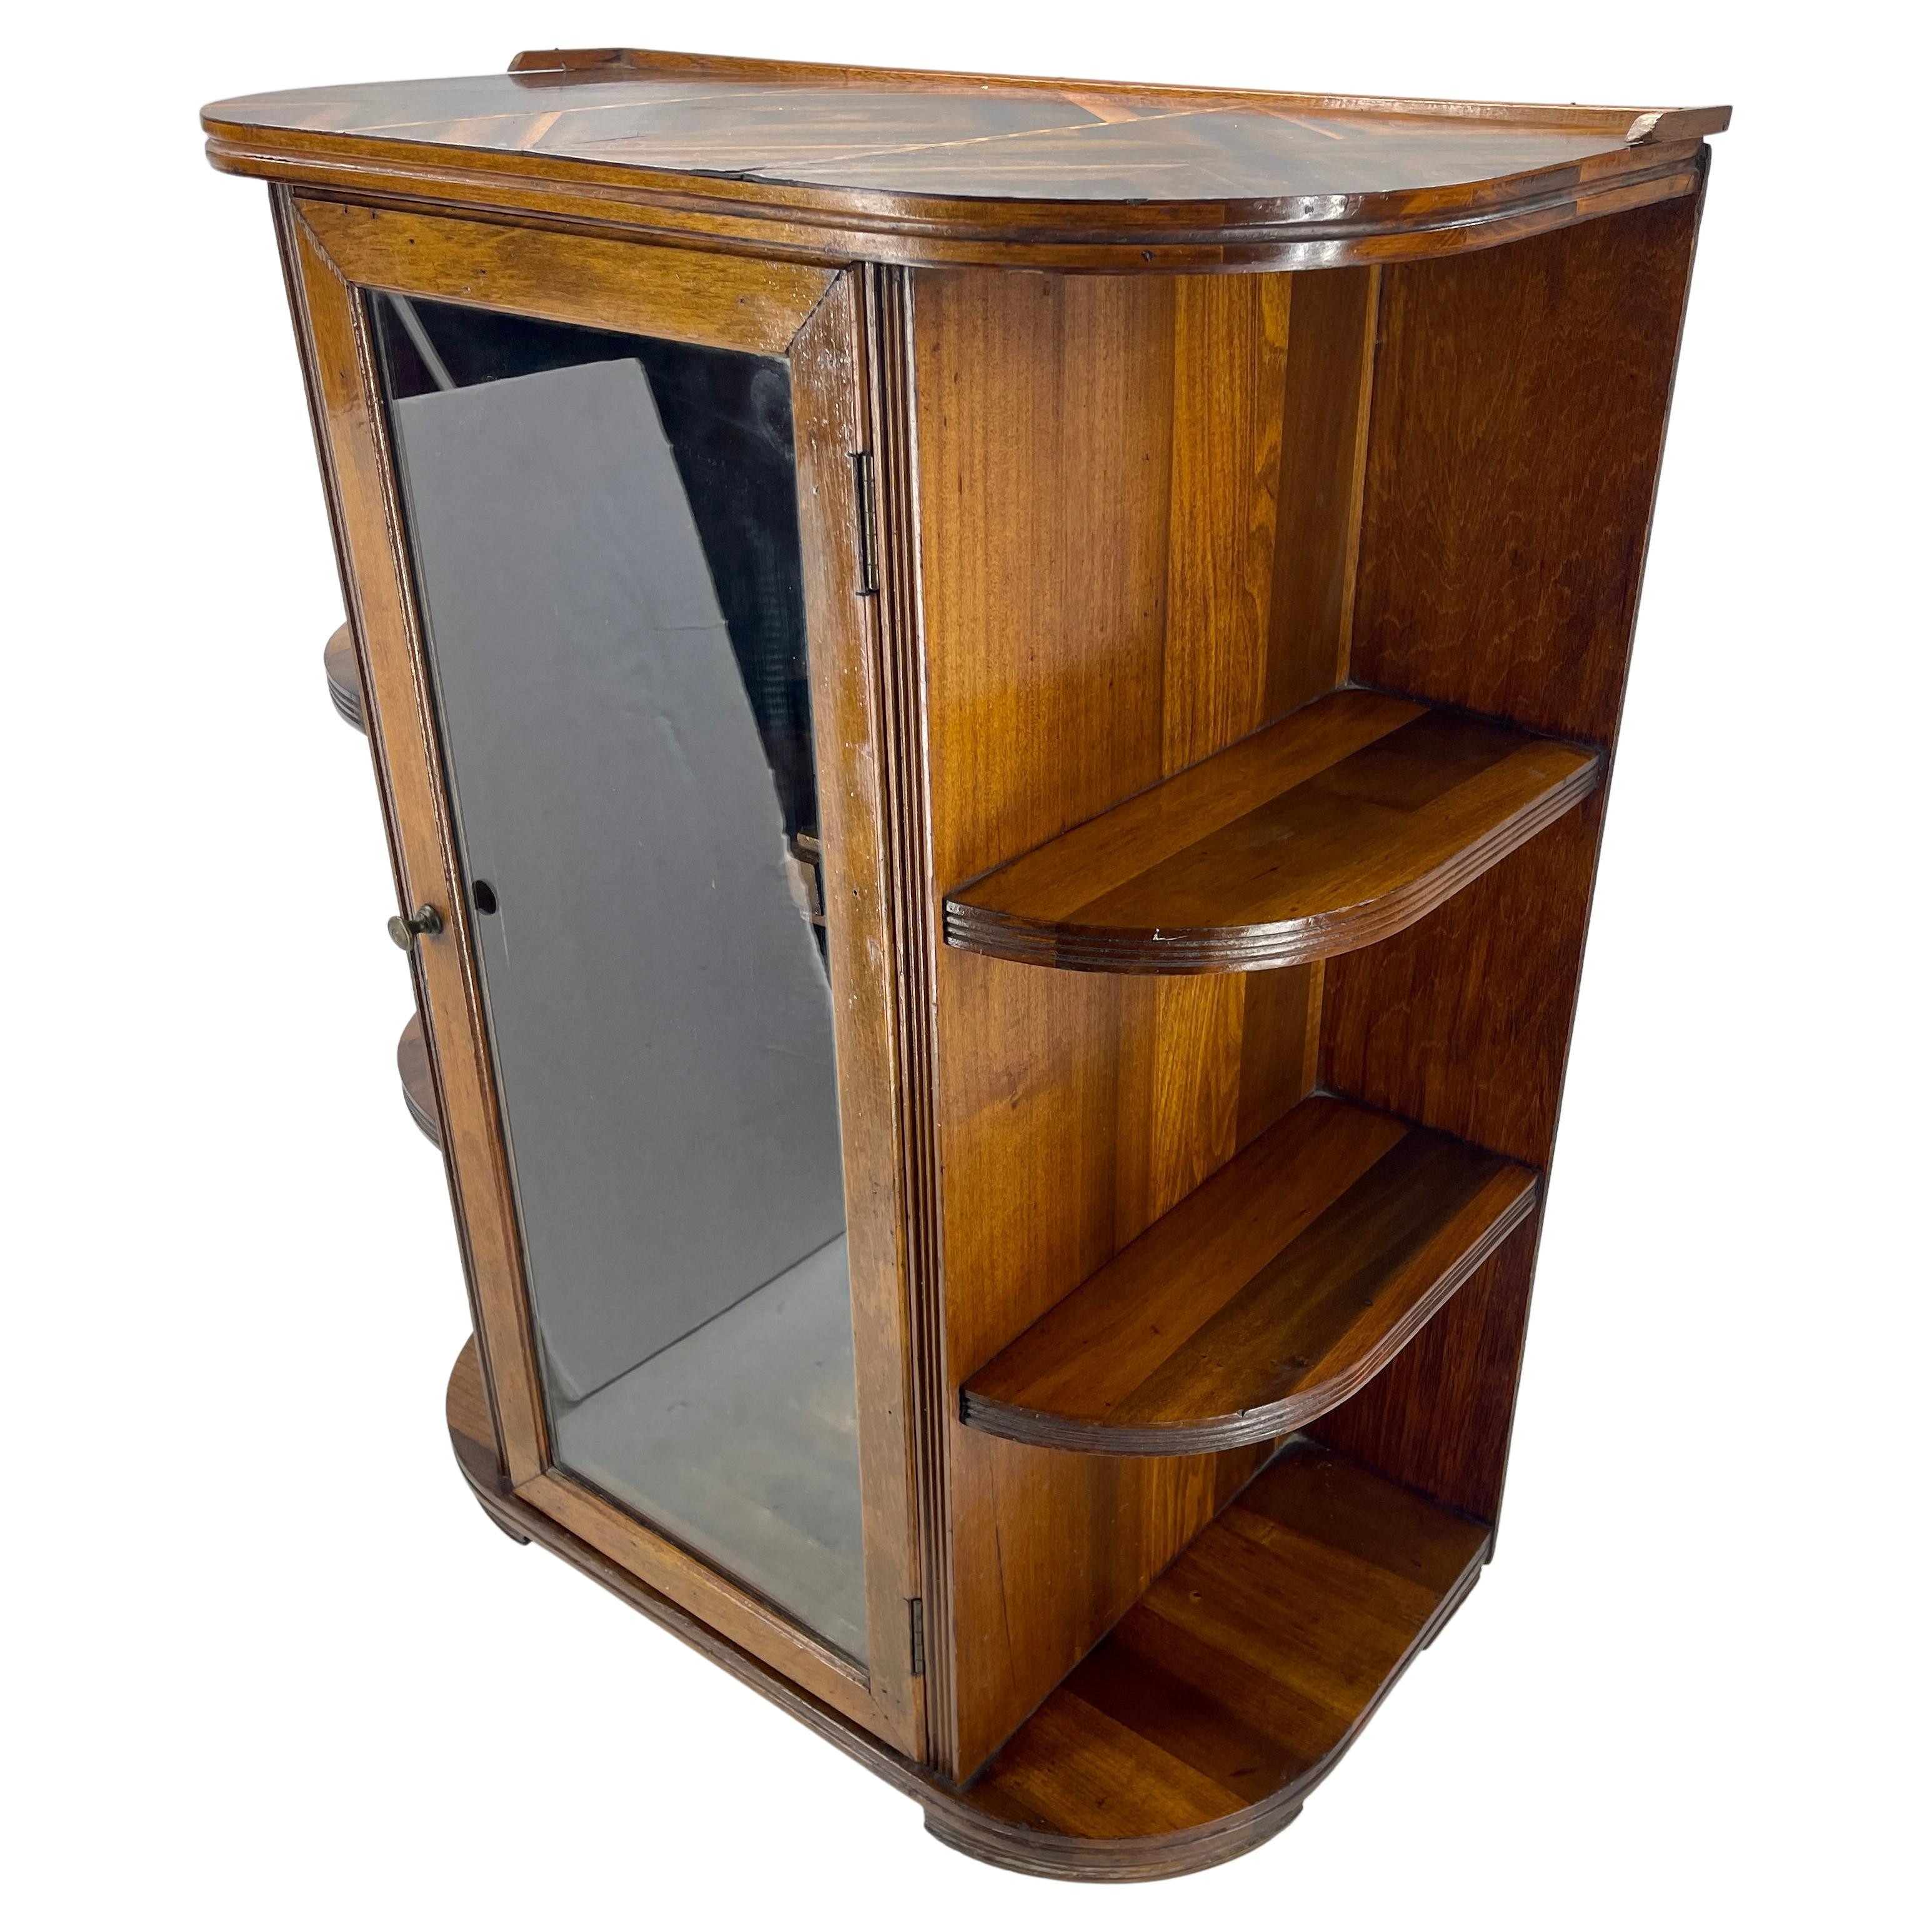 Art Deco bar with walnut and glass front cabinet. This compact bar from 1930's Germany is as beautiful as it is practical. The top of the bar is with inlay fruitwood. The sides have softly curved shelves to hold glasses or bottles. The bar sits on